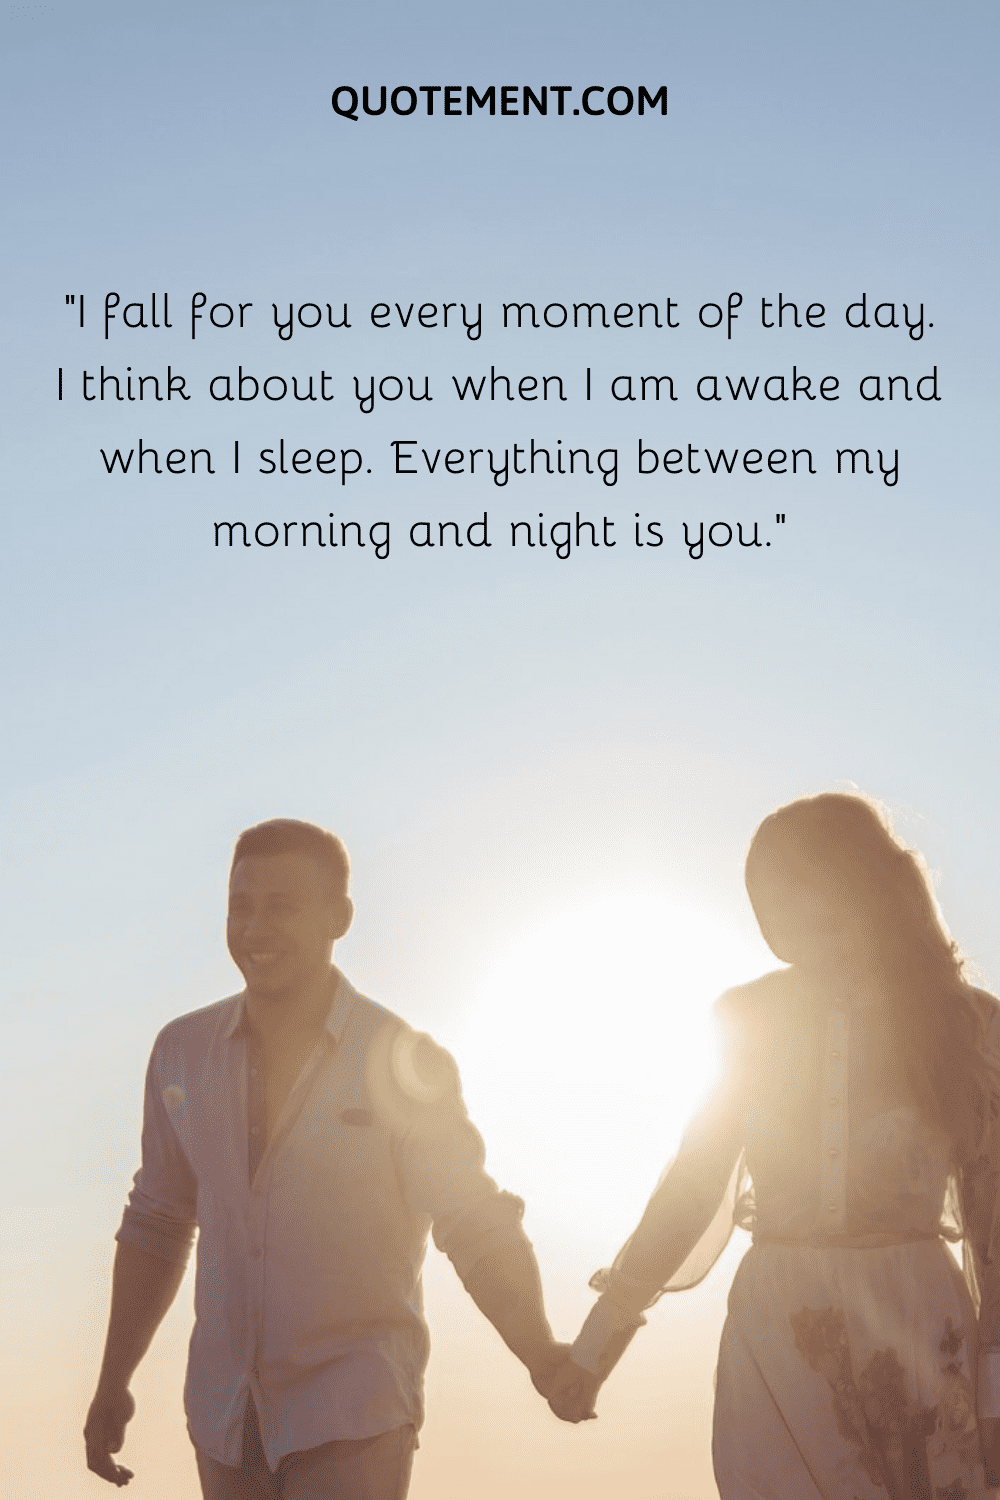 “I fall for you every moment of the day. I think about you when I am awake and when I sleep. Everything between my morning and night is you.”